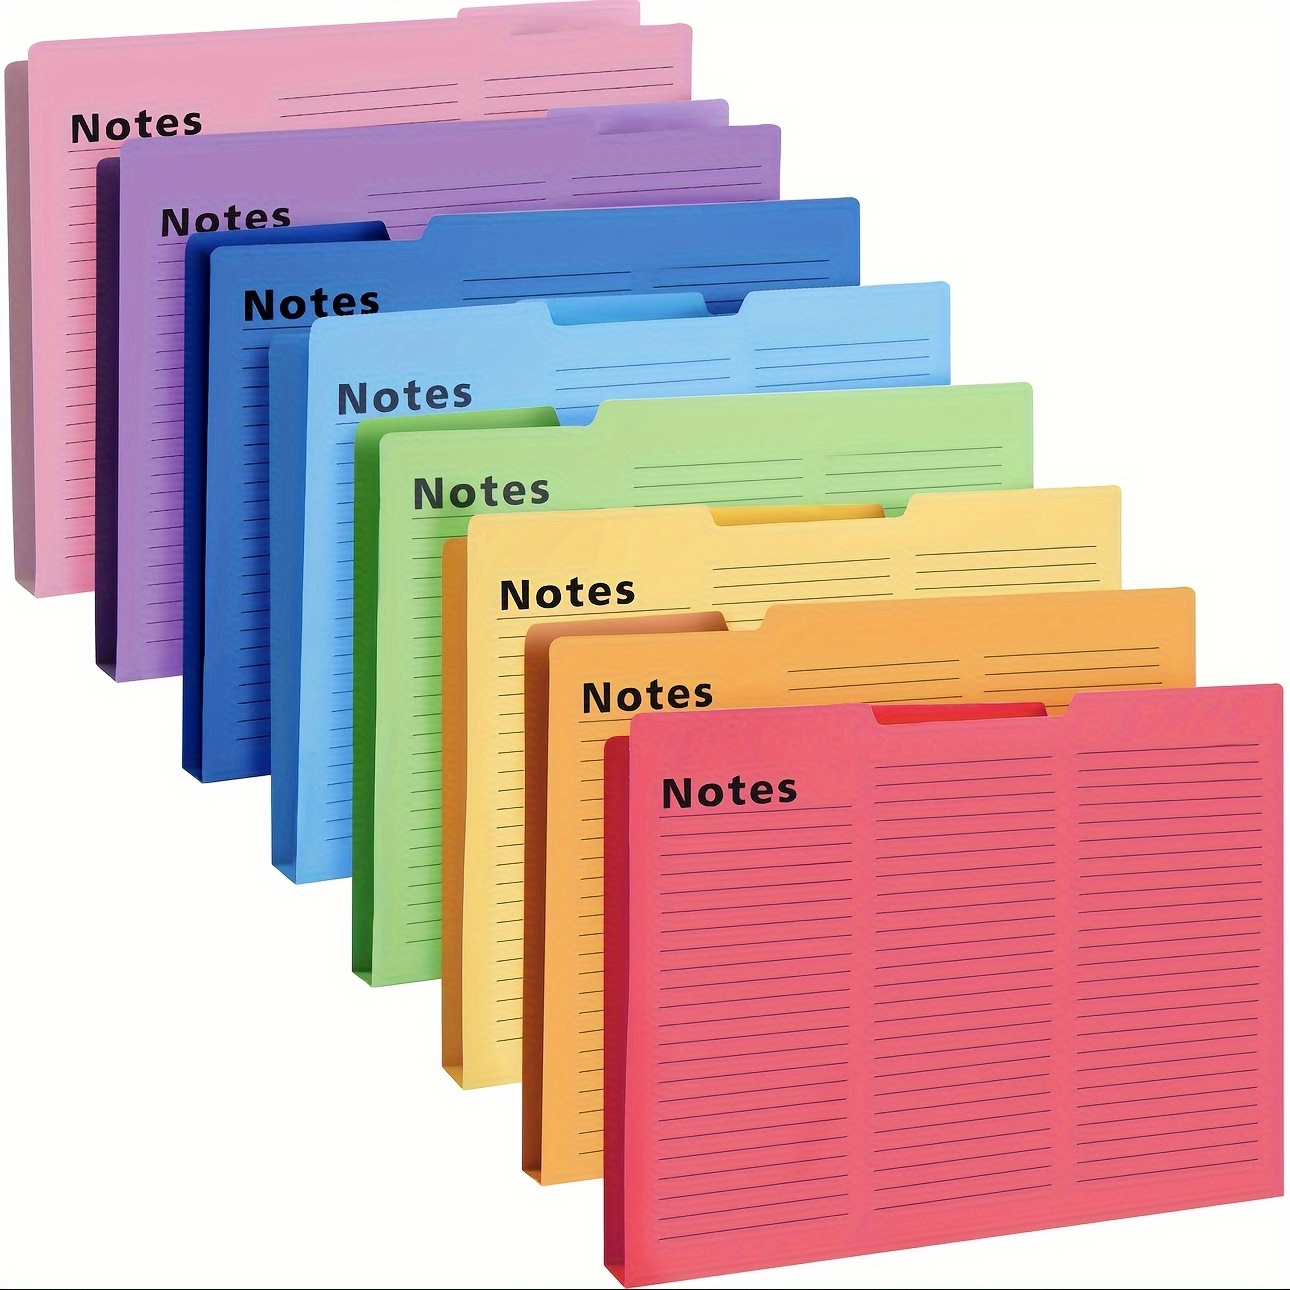 

16-piece Manila File Folders In Assorted Colors - Durable Paper Document Organizer For Office And Home Storage, 11.5x9.6 Inches